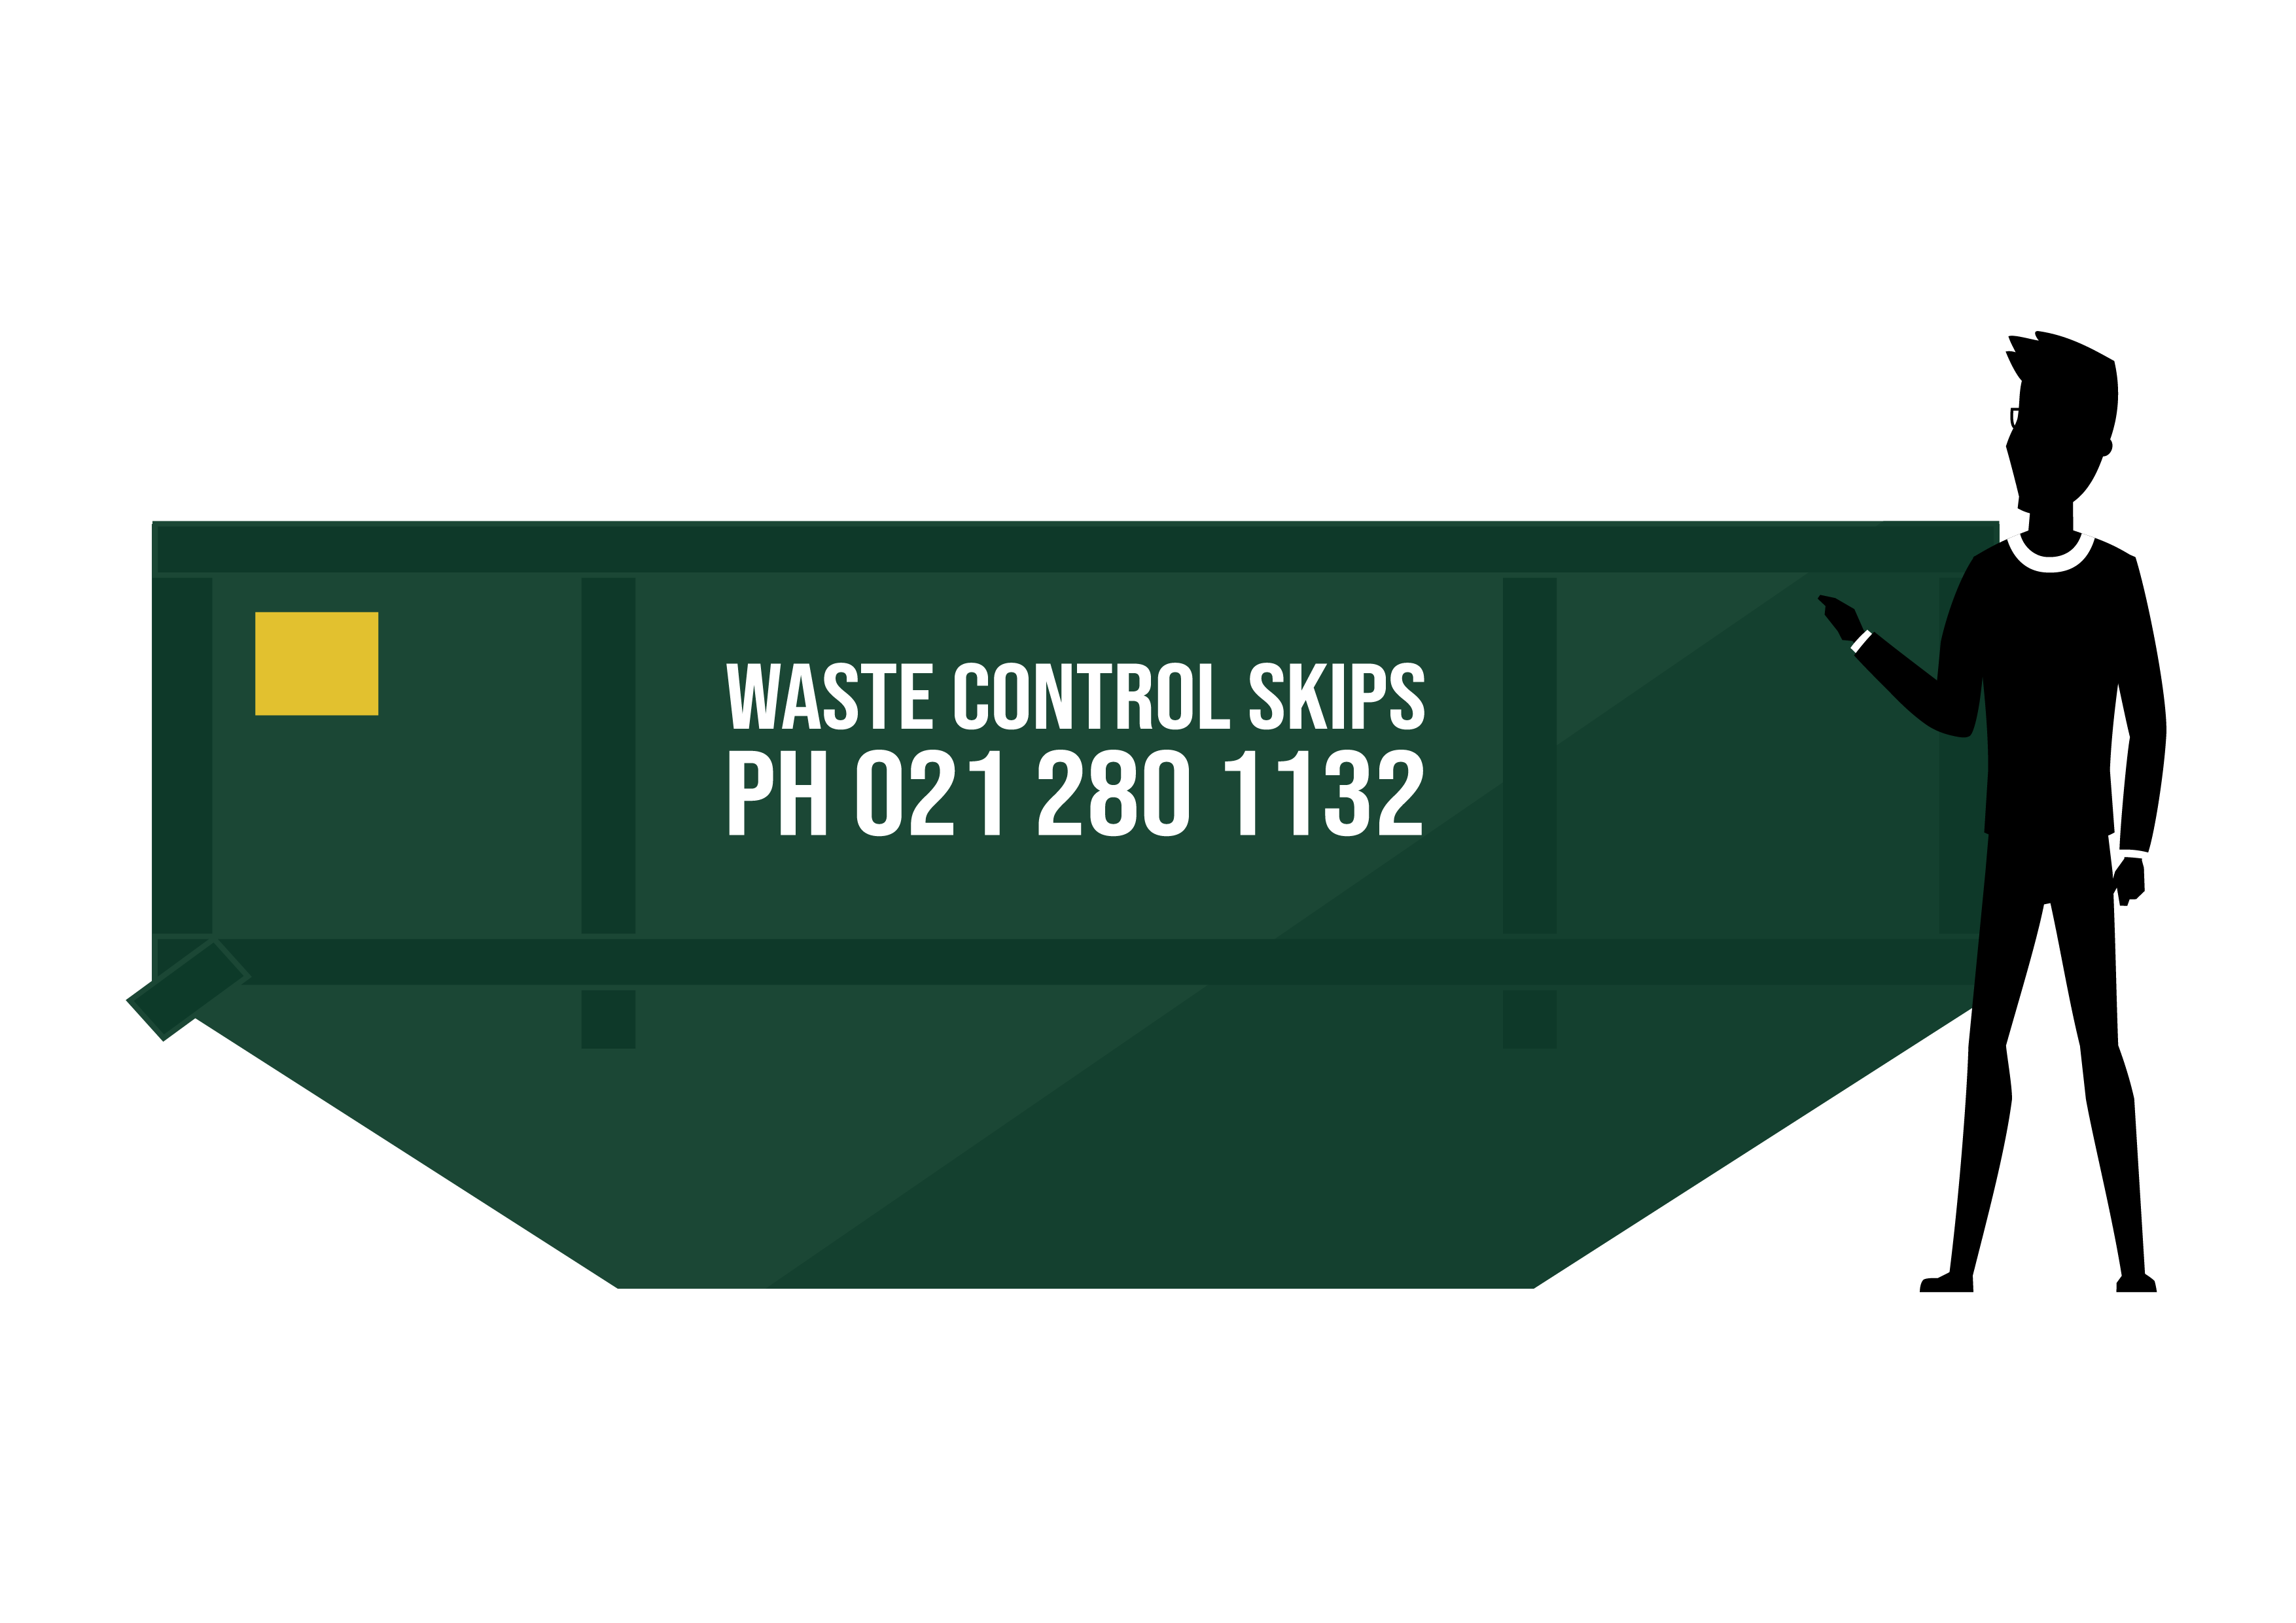 If you need a skip bin hire go to Waste Control Skips for green waste removal